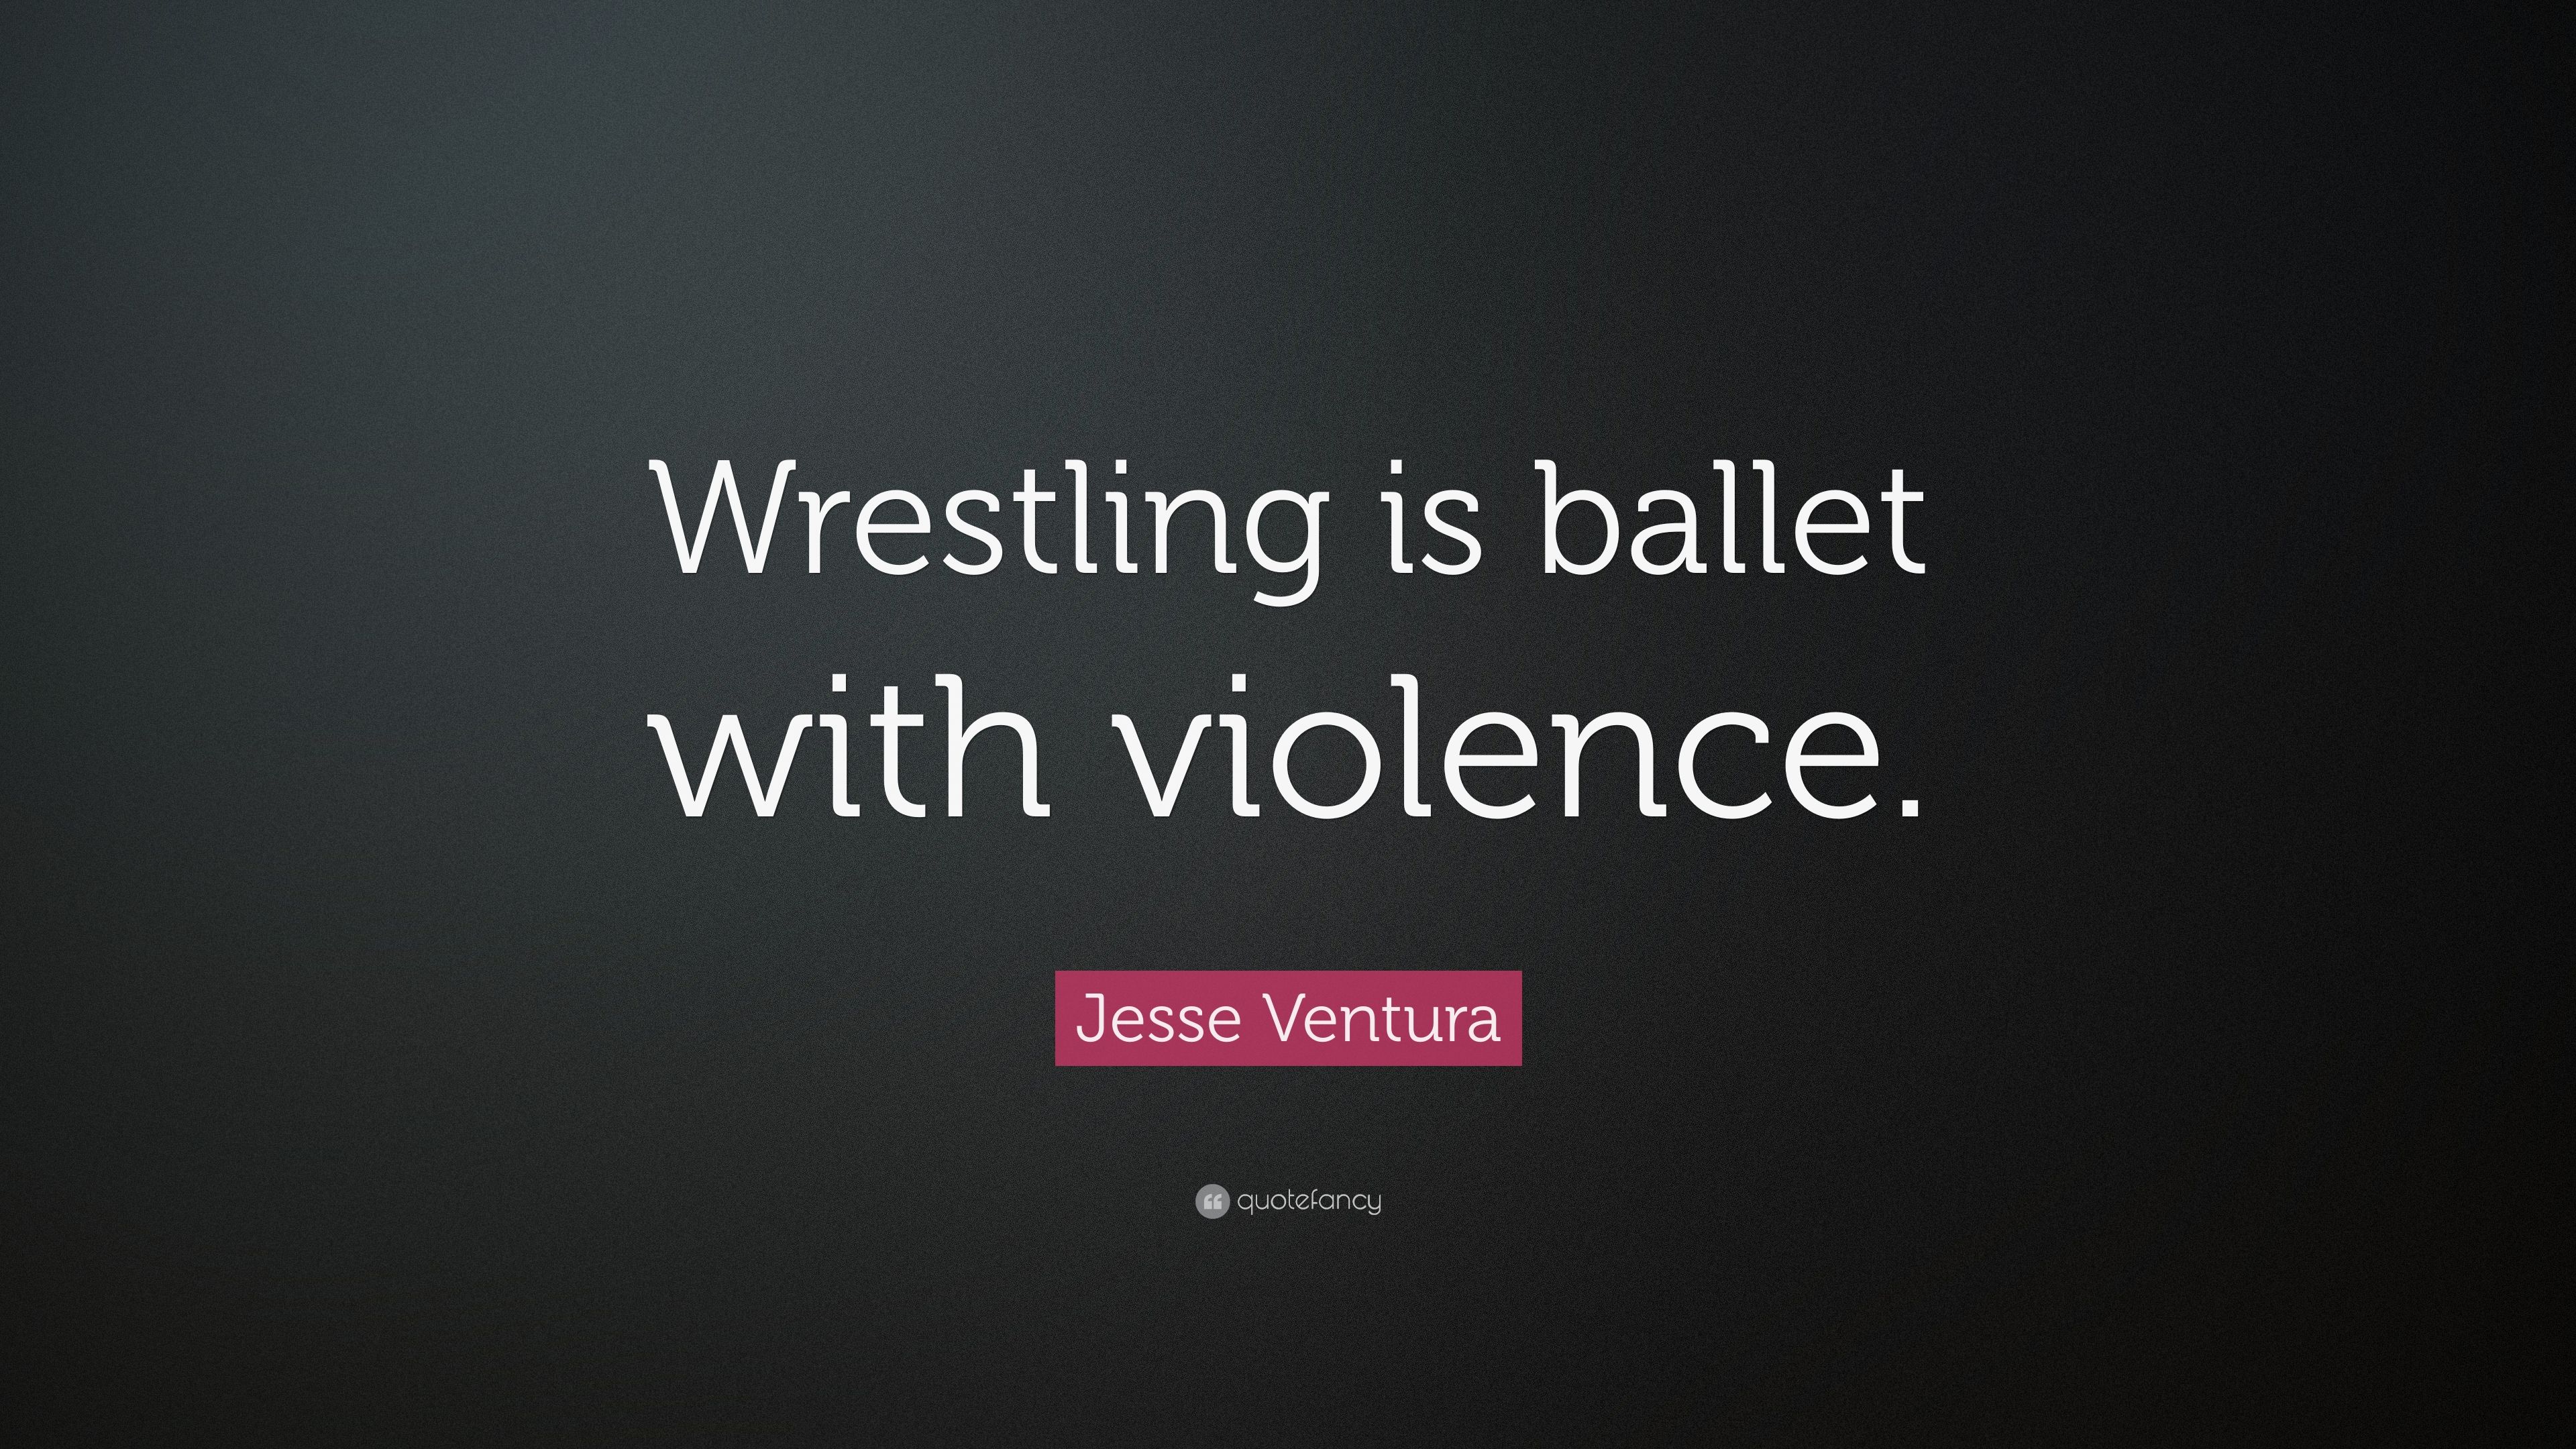 Jesse Ventura Quote: “Wrestling is ballet with violence.” 7